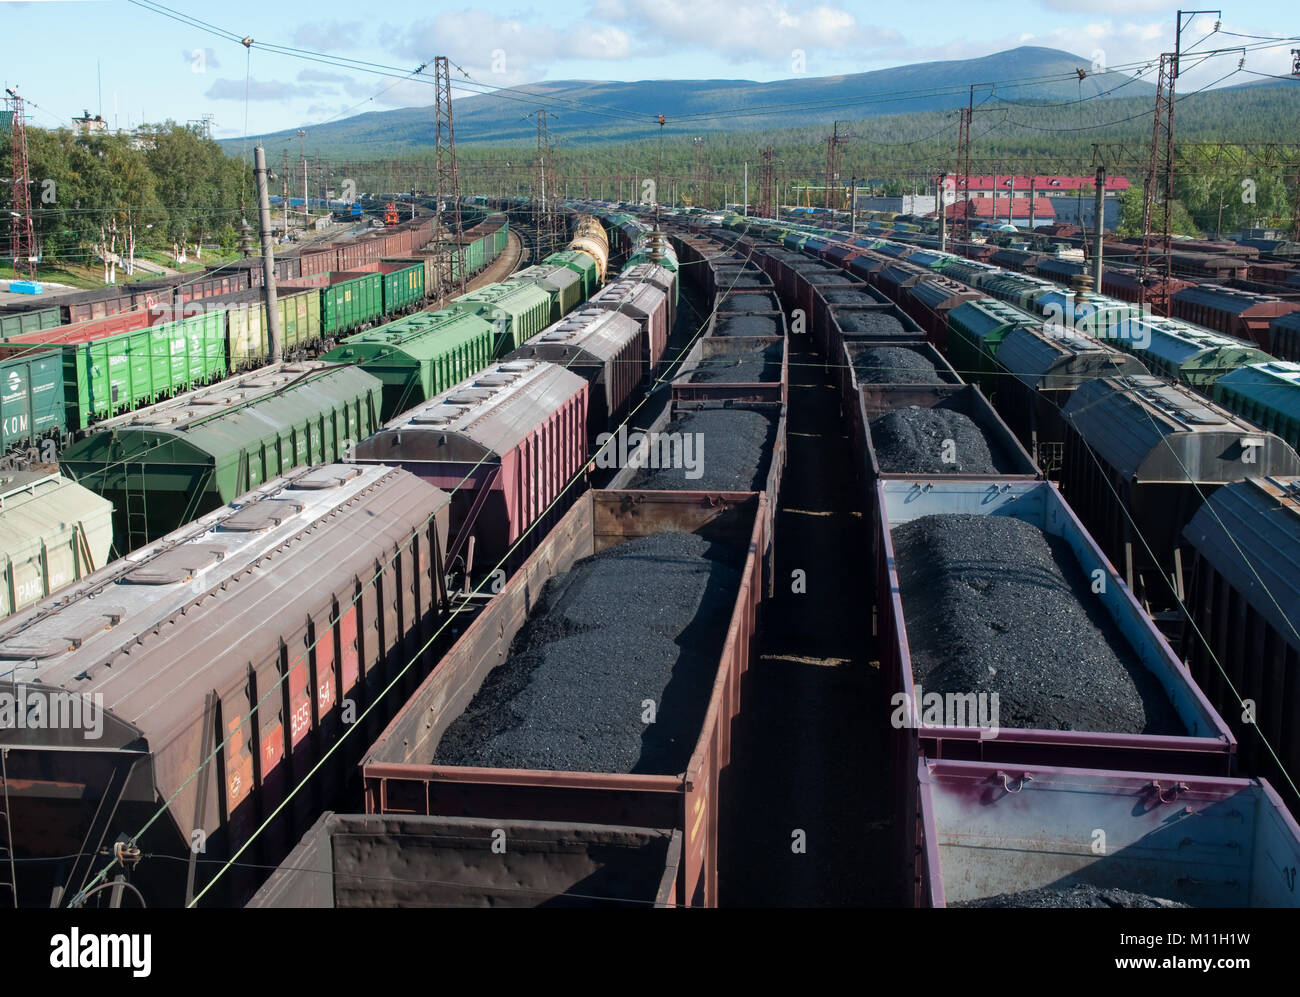 Kandalaksha, Russia - August 28, 2012: Cars with coal and oil of station Stock Photo